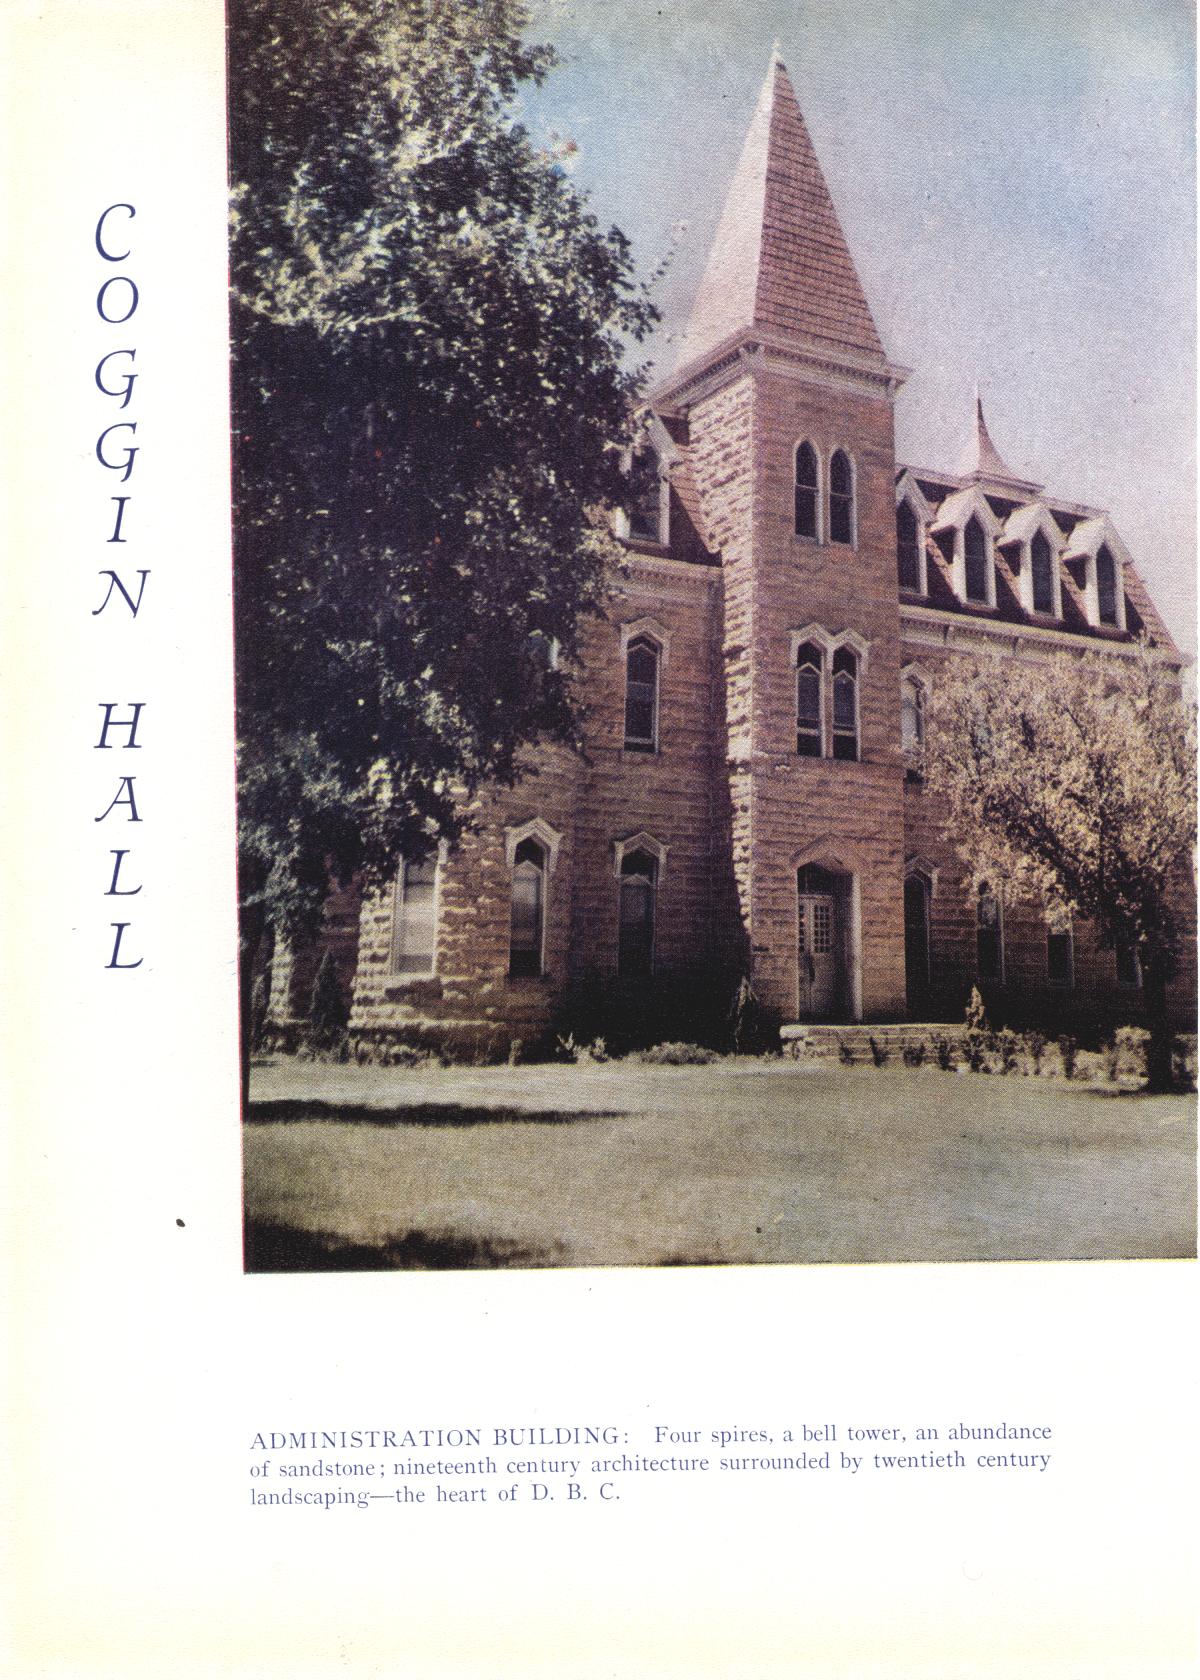 The Trail, Yearbook of Daniel Baker College, 1941
                                                
                                                    2
                                                